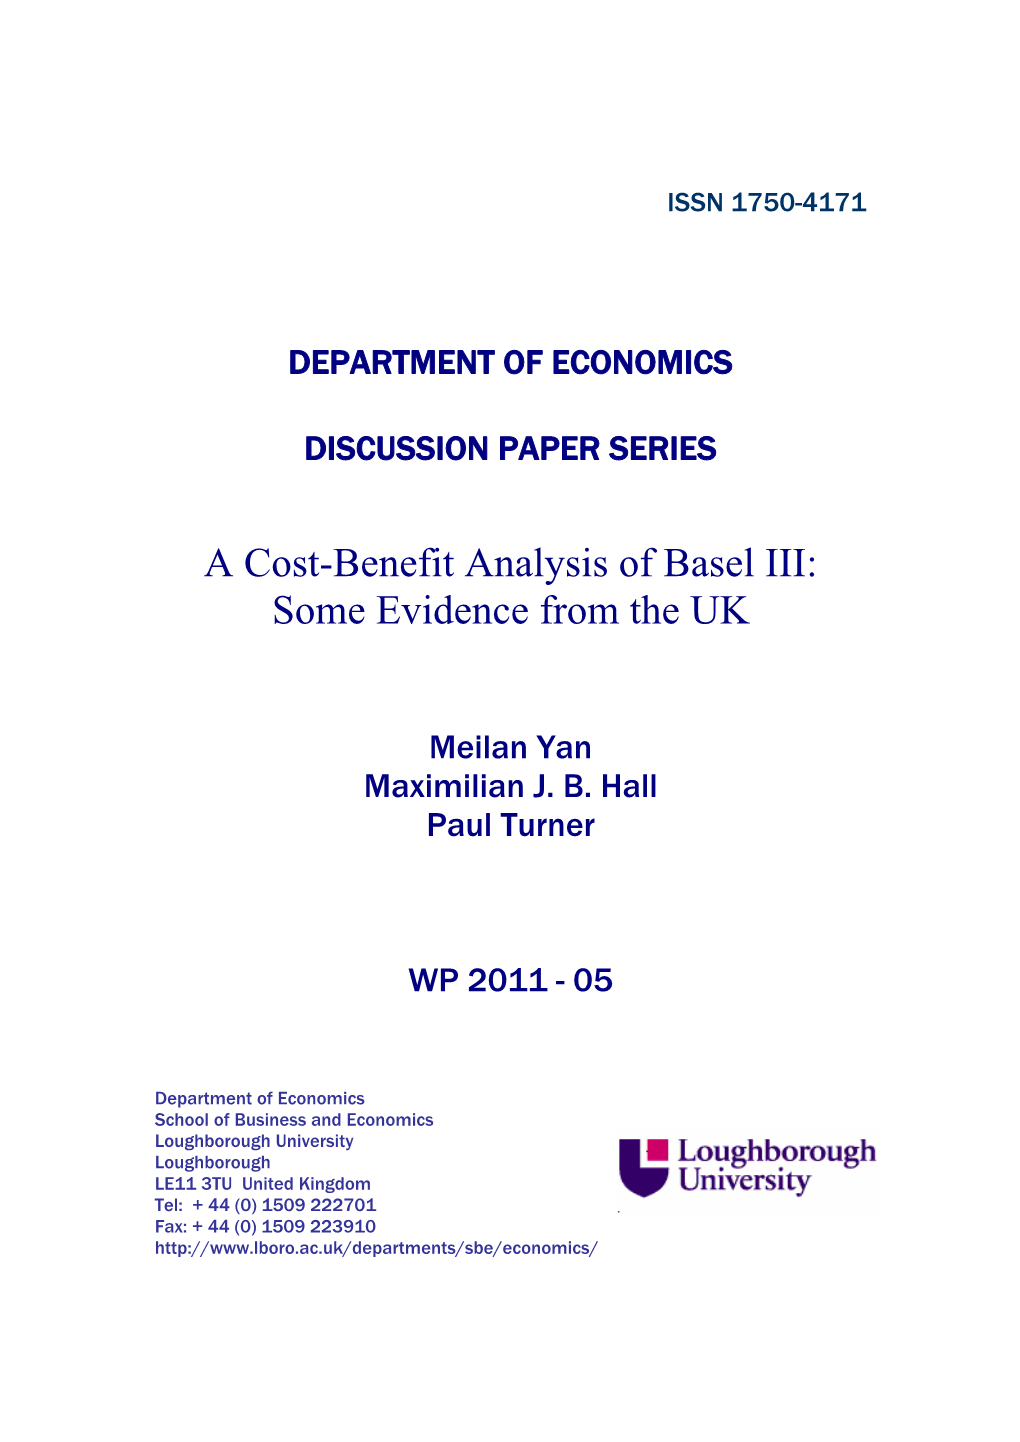 A Cost-Benefit Analysis of Basel III: Some Evidence from the UK